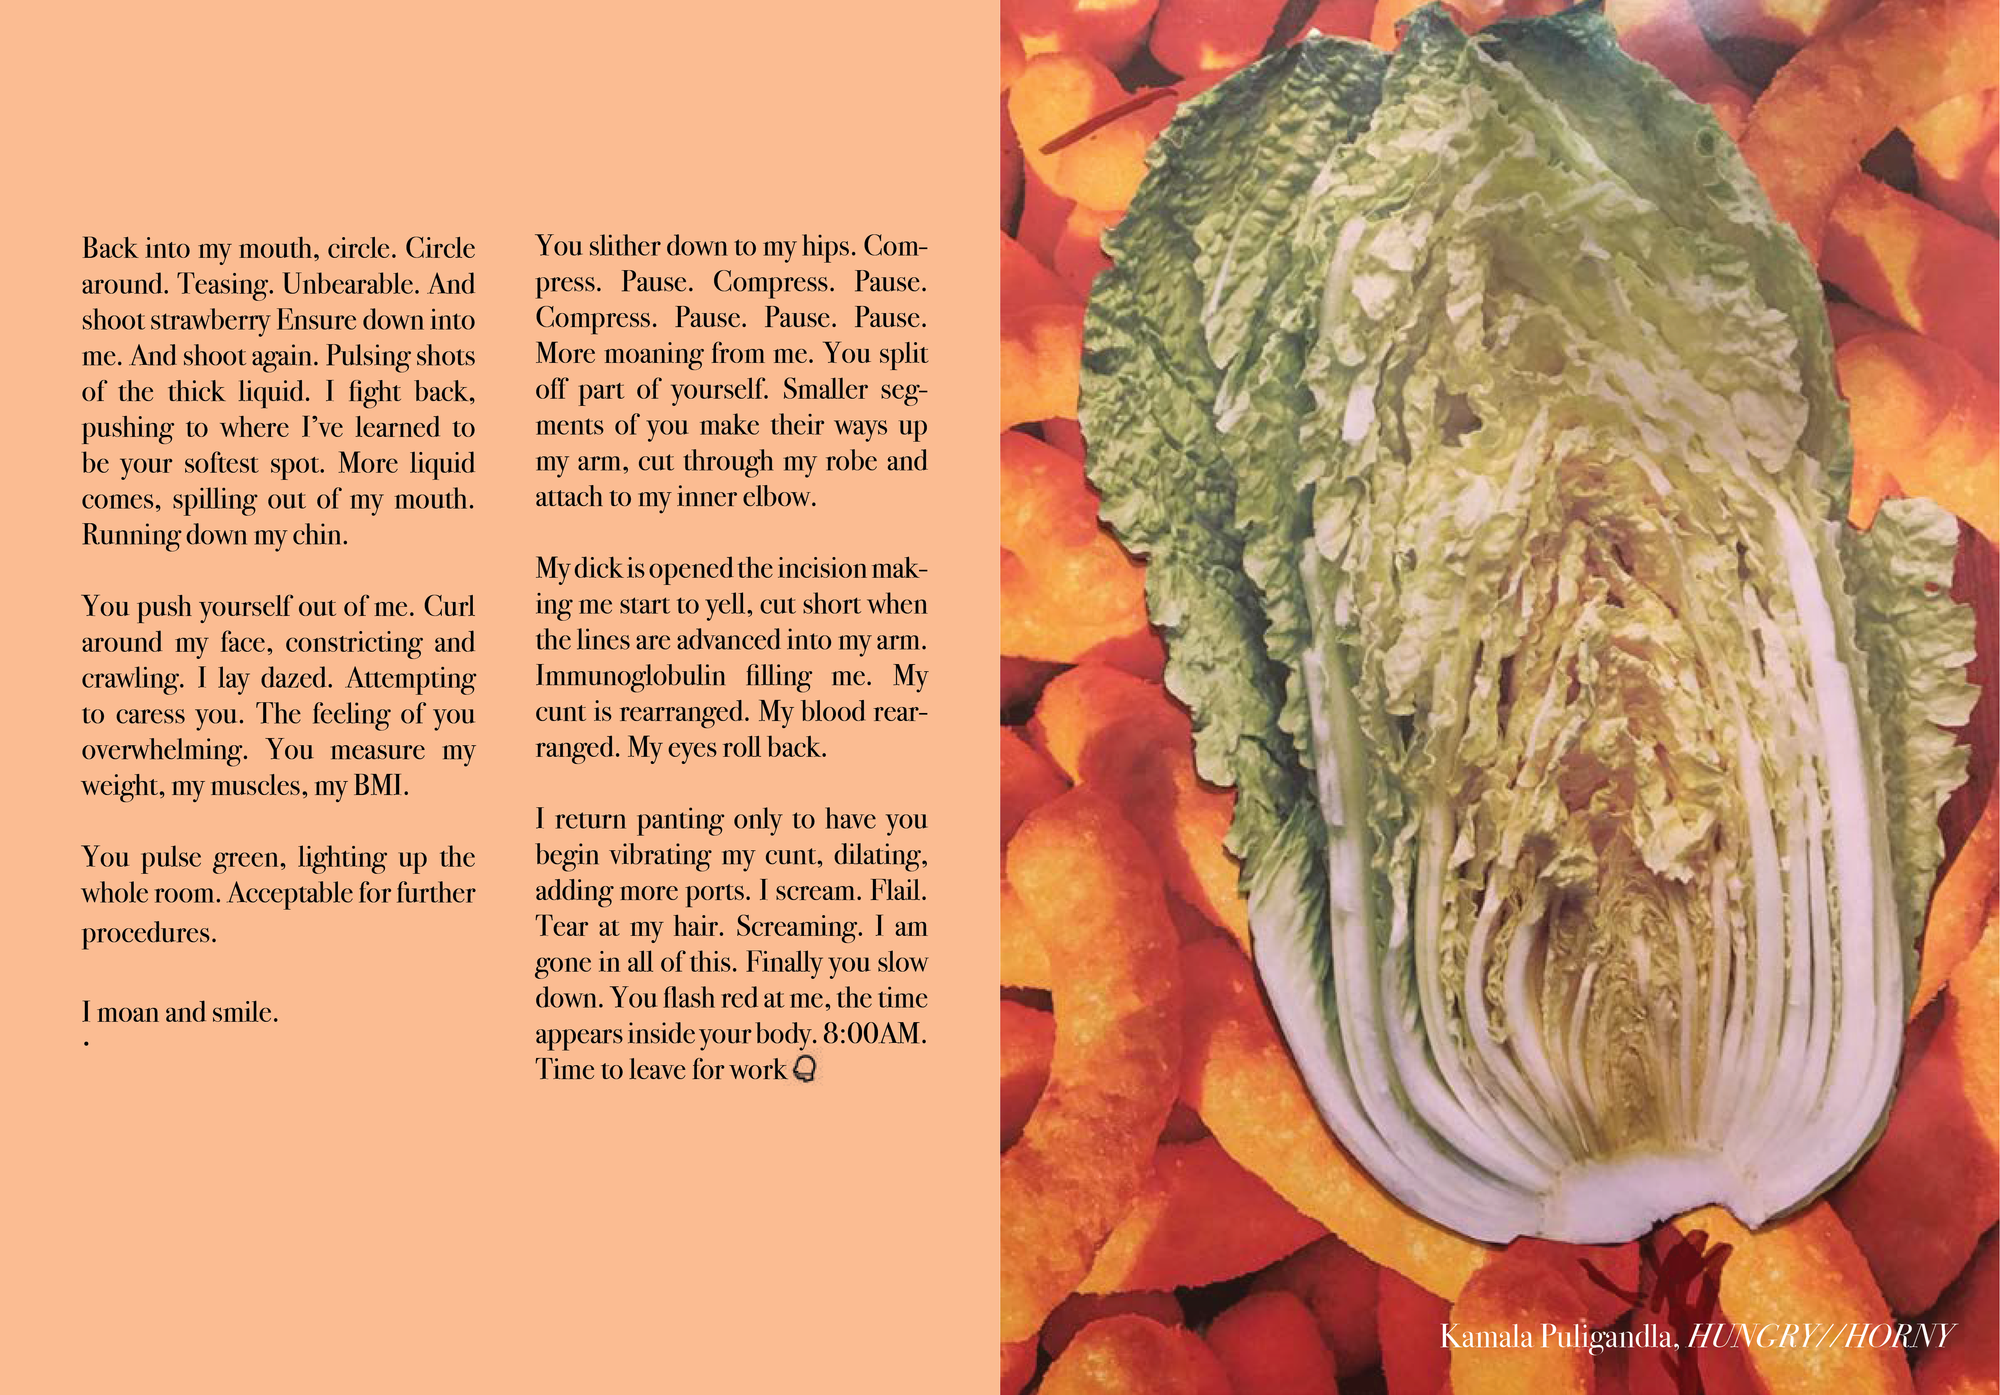 on the right a vertical section of Chinese cabbage lies on top of orange Cheetos. On the left two columns of text in black on a salmon pastel background